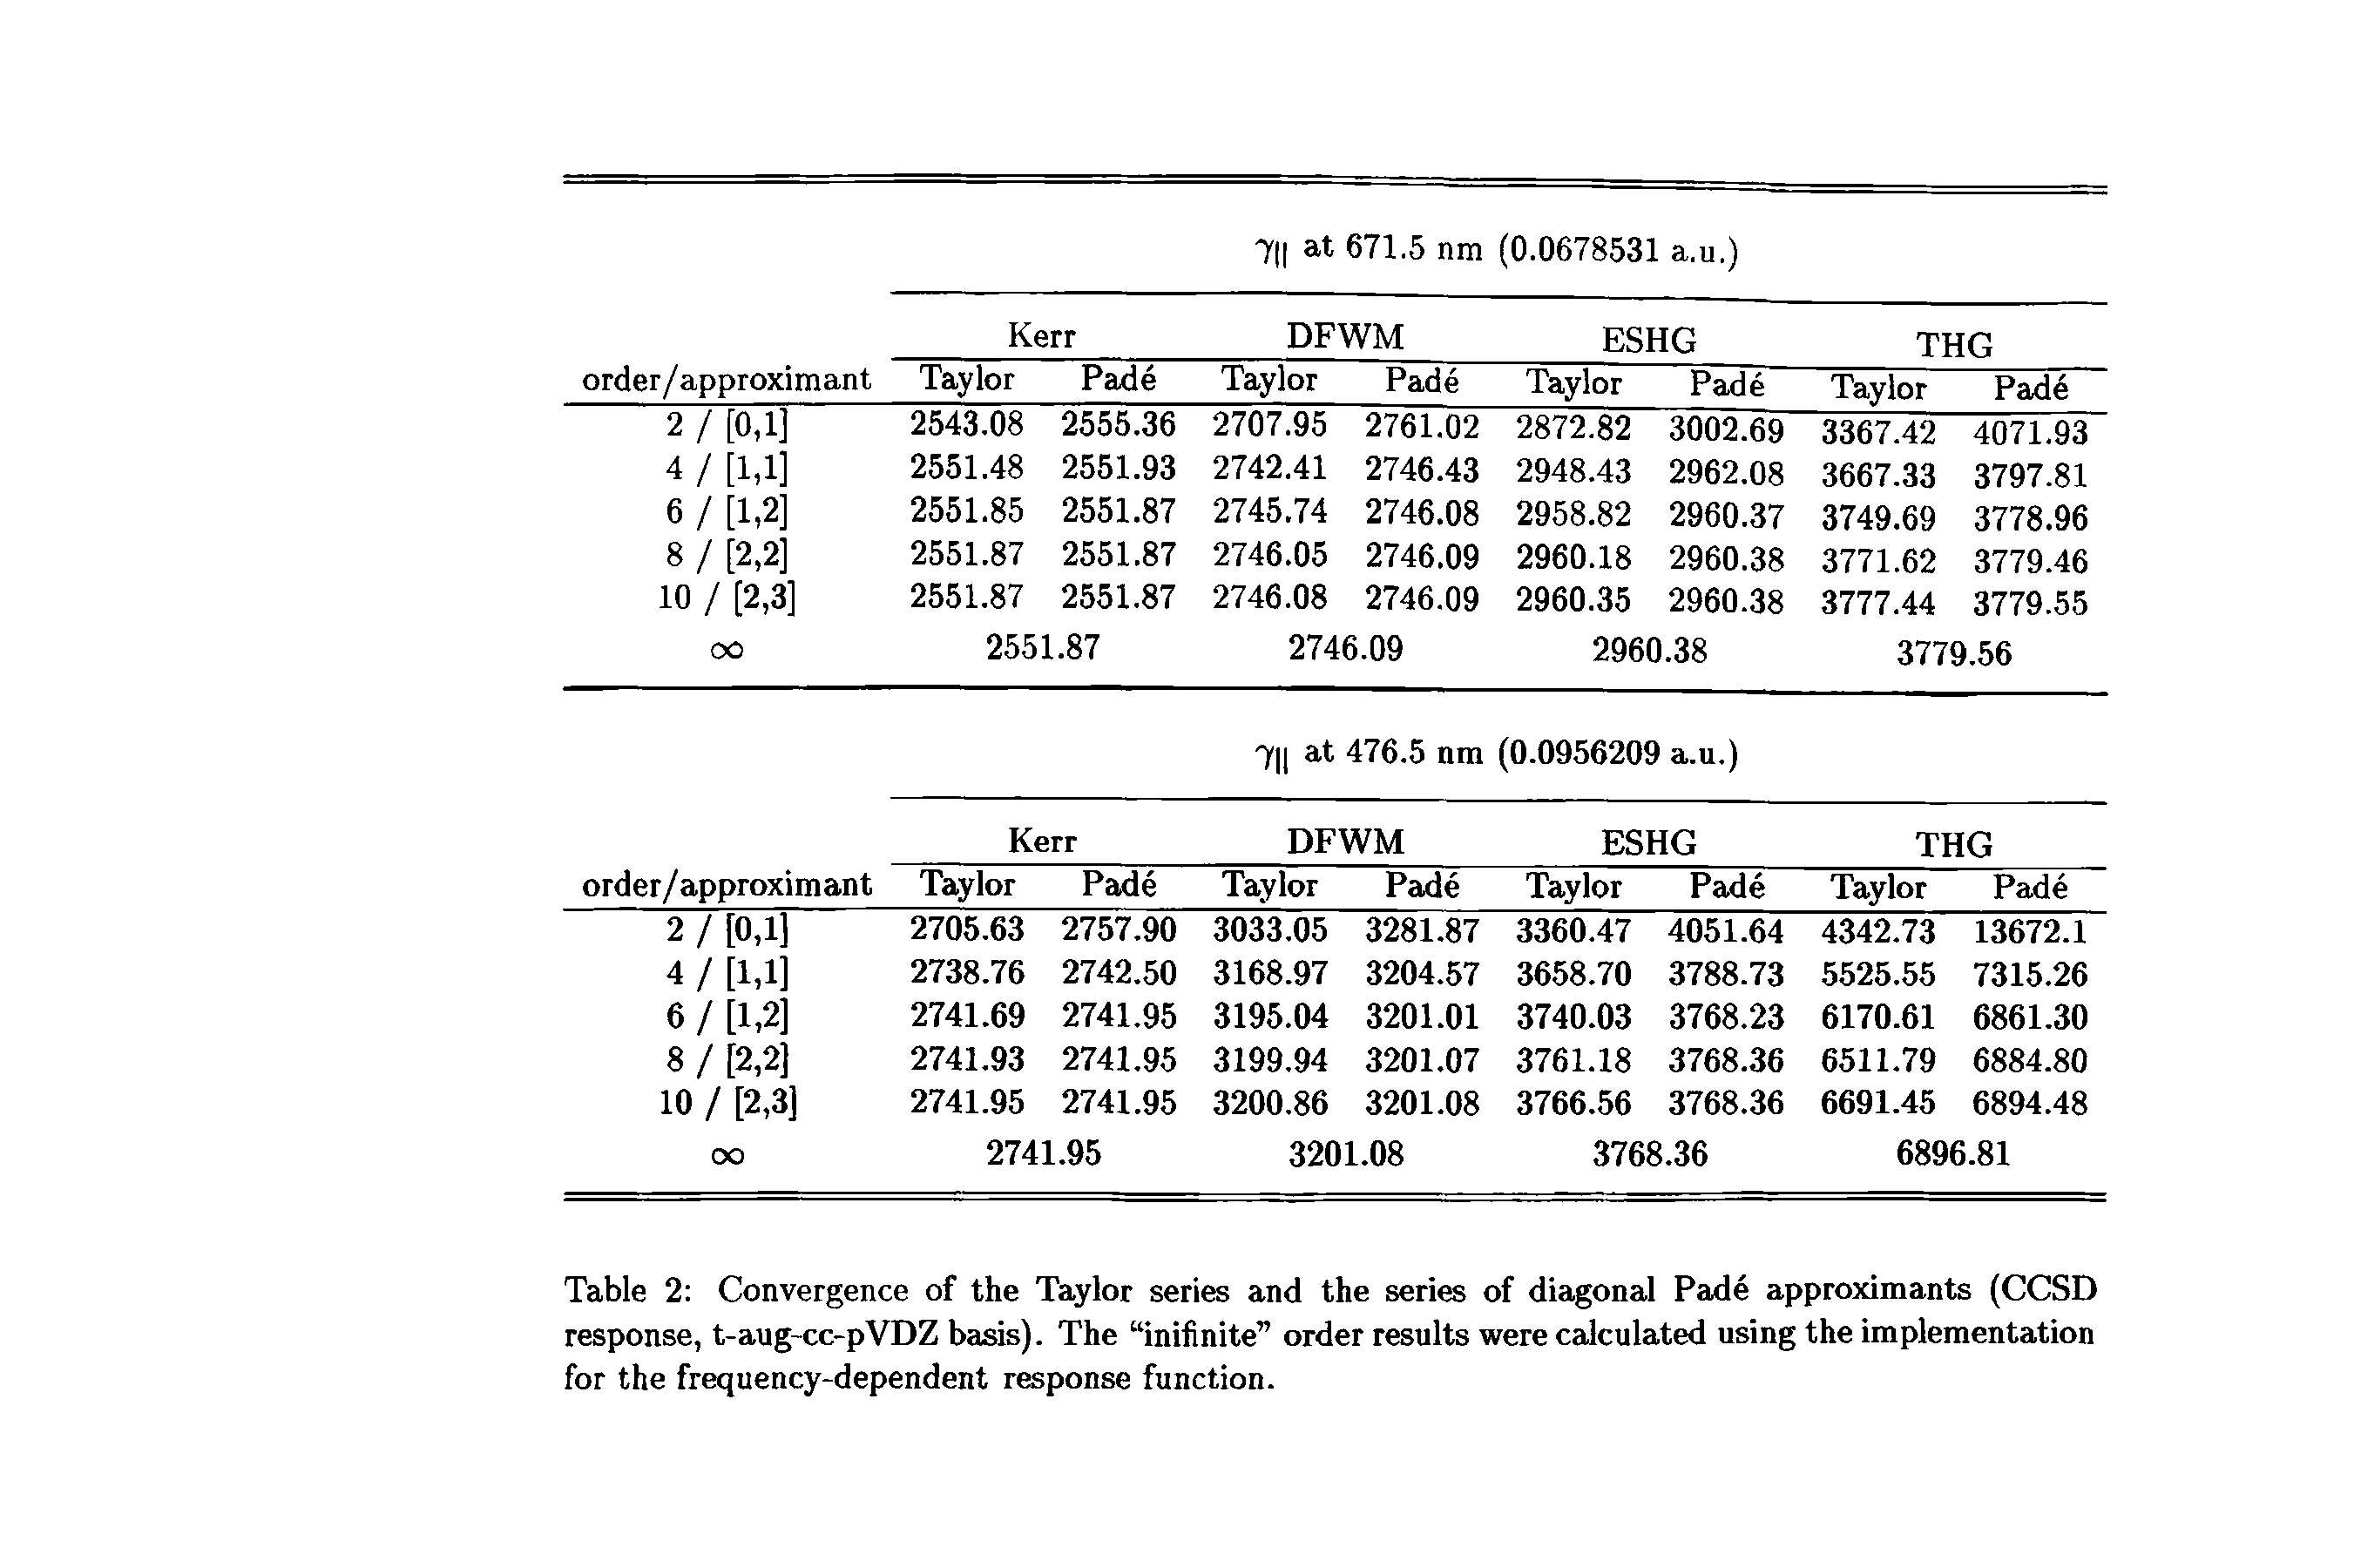 Table 2 Convergence of the Taylor series and the series of diagonal Fade approximants (CCSD response, t-aug-cc-pVDZ basis). The inifinite order results were calculated using the implementation for the frequency-dependent response function.